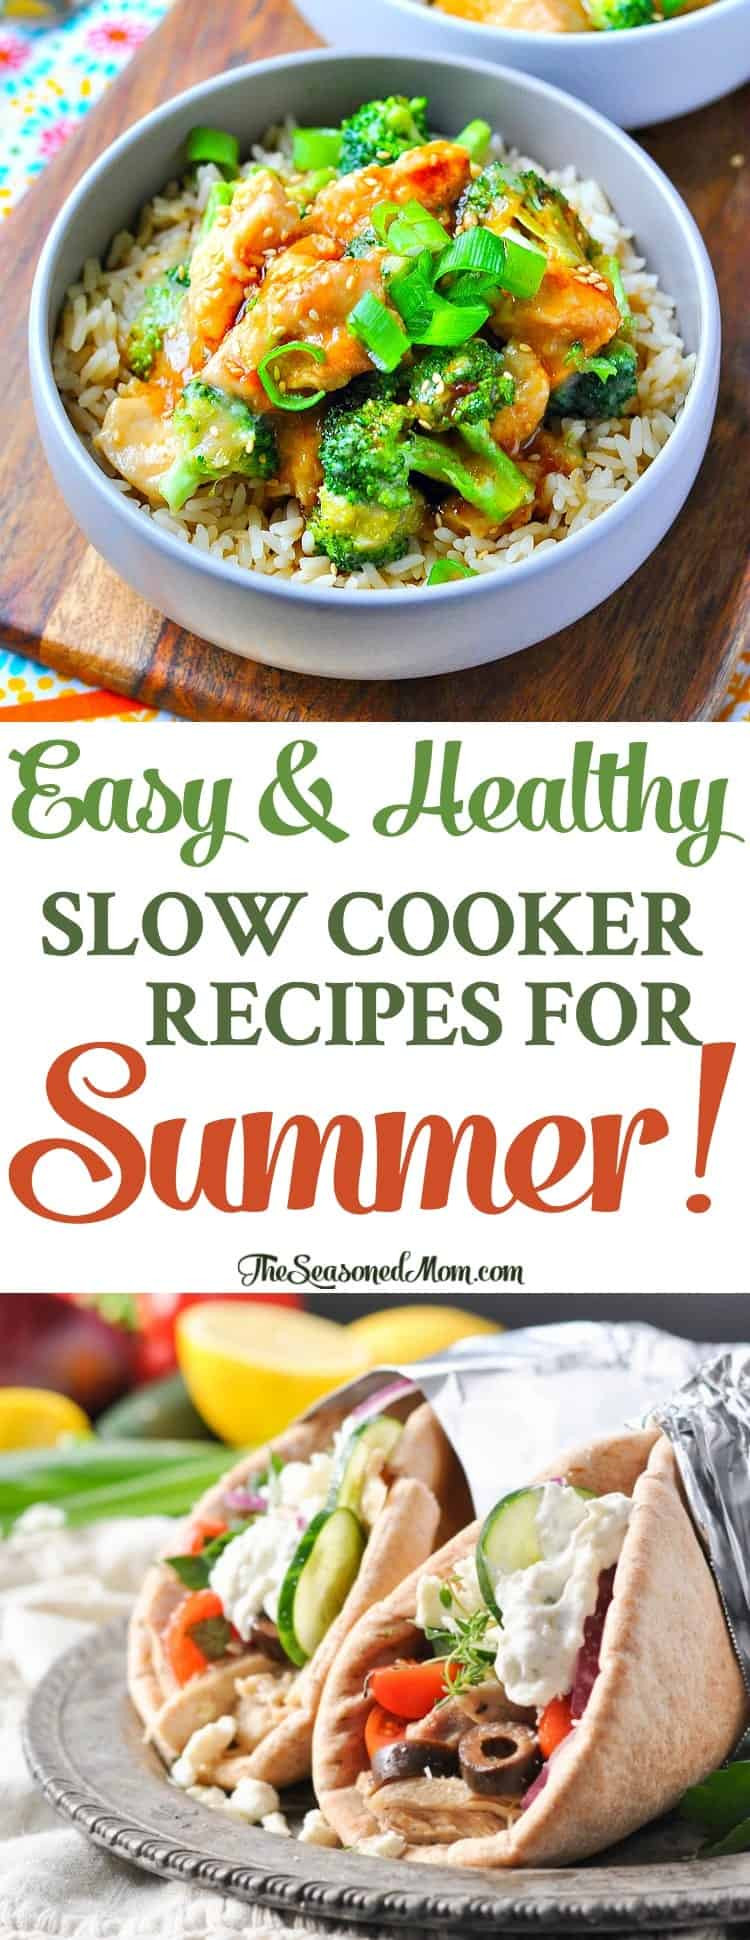 Slow Cooker Recipes Healthy
 Easy Healthy Slow Cooker Recipes for Summer The